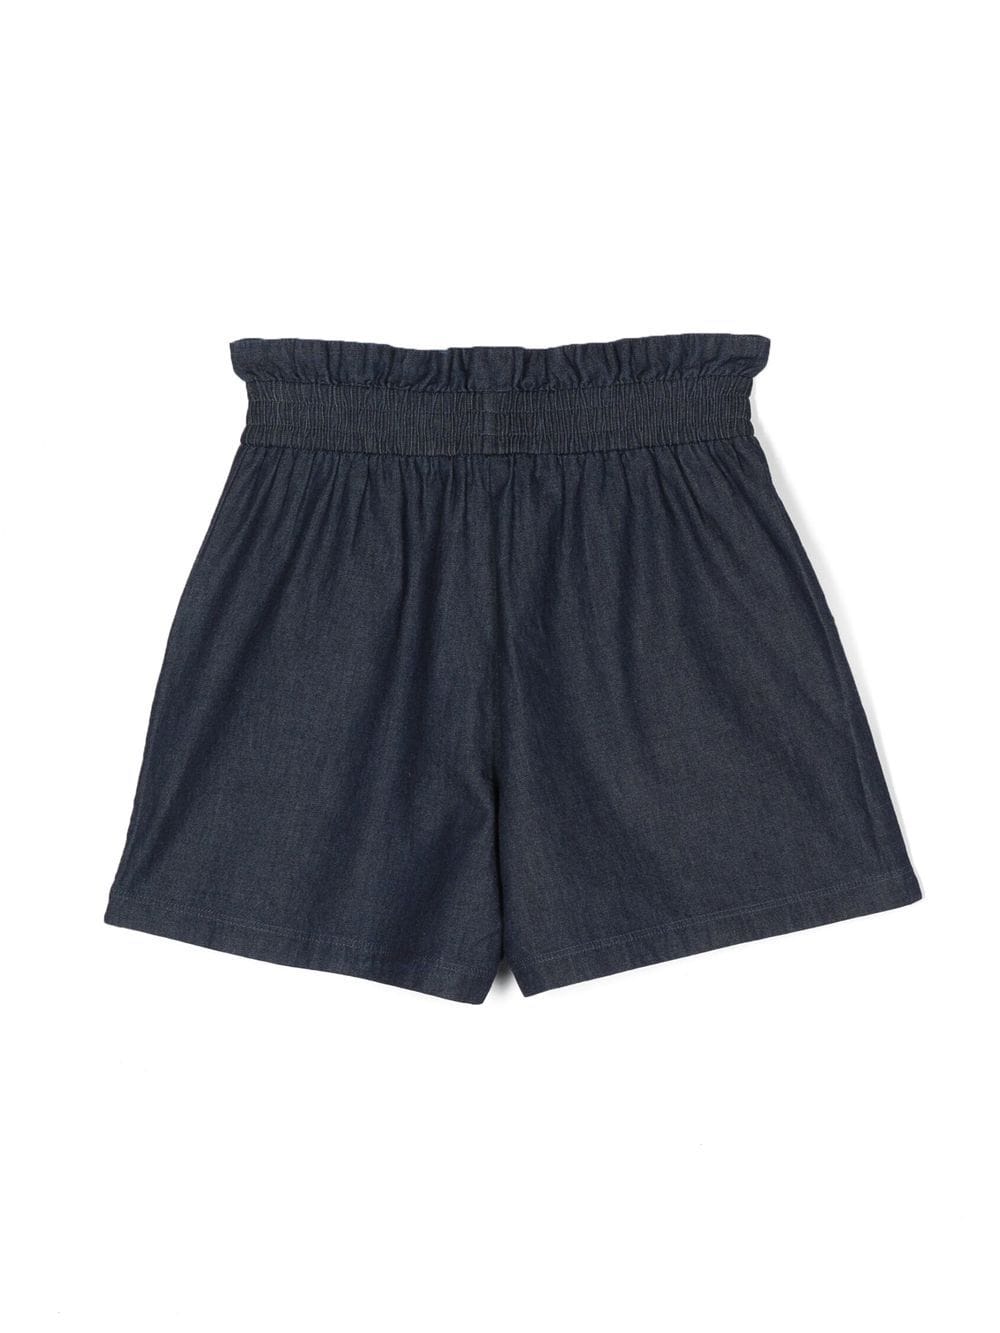 Blue shorts for girls with logo